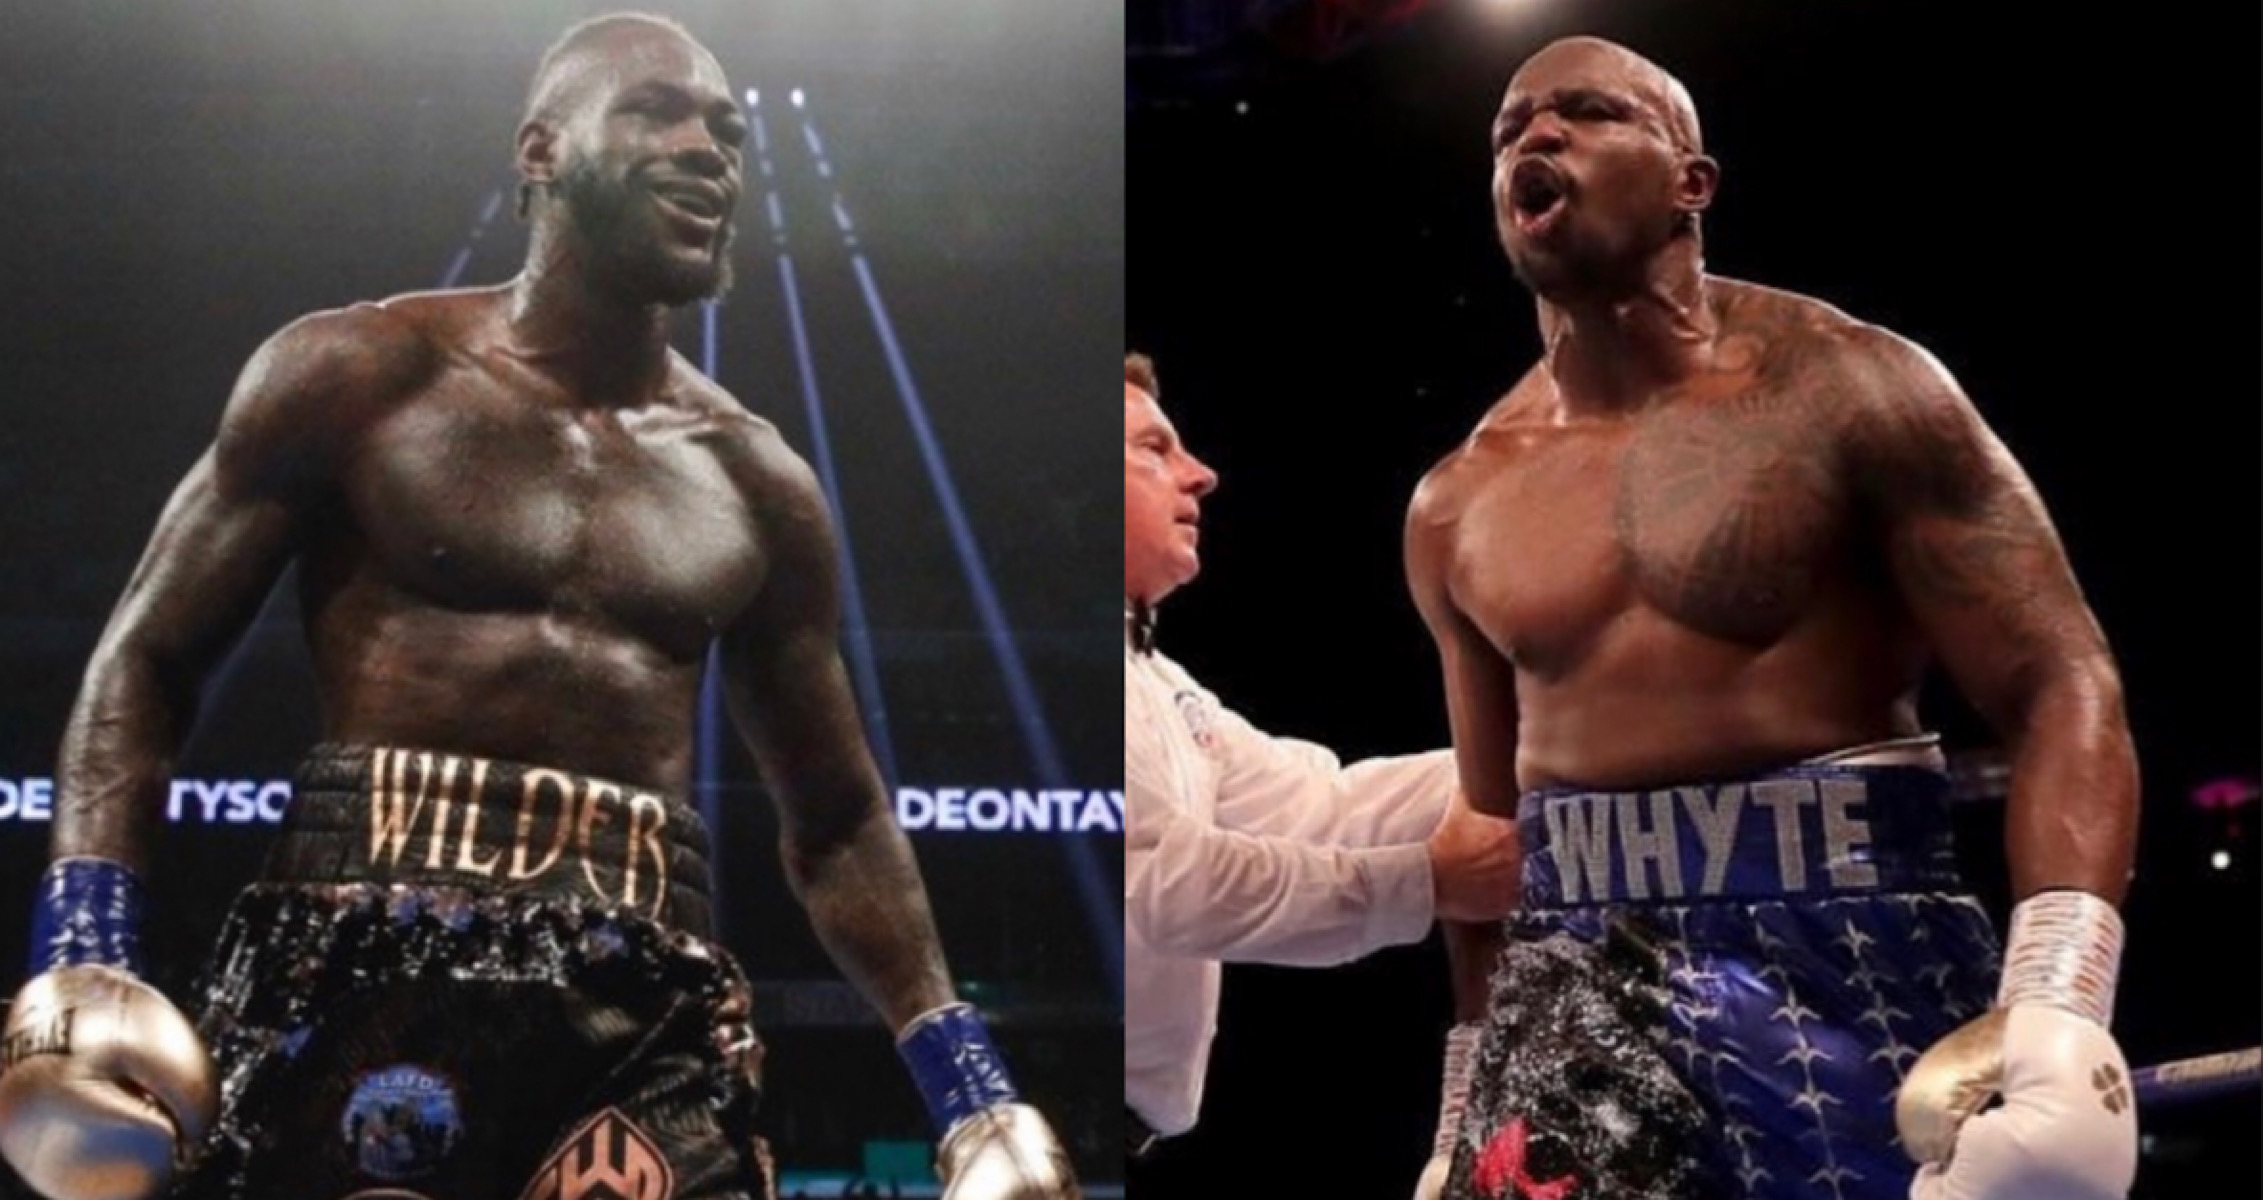 Deontay Wilder Hits New Bench Press PR, Gets Roasted By Dillian Whyte